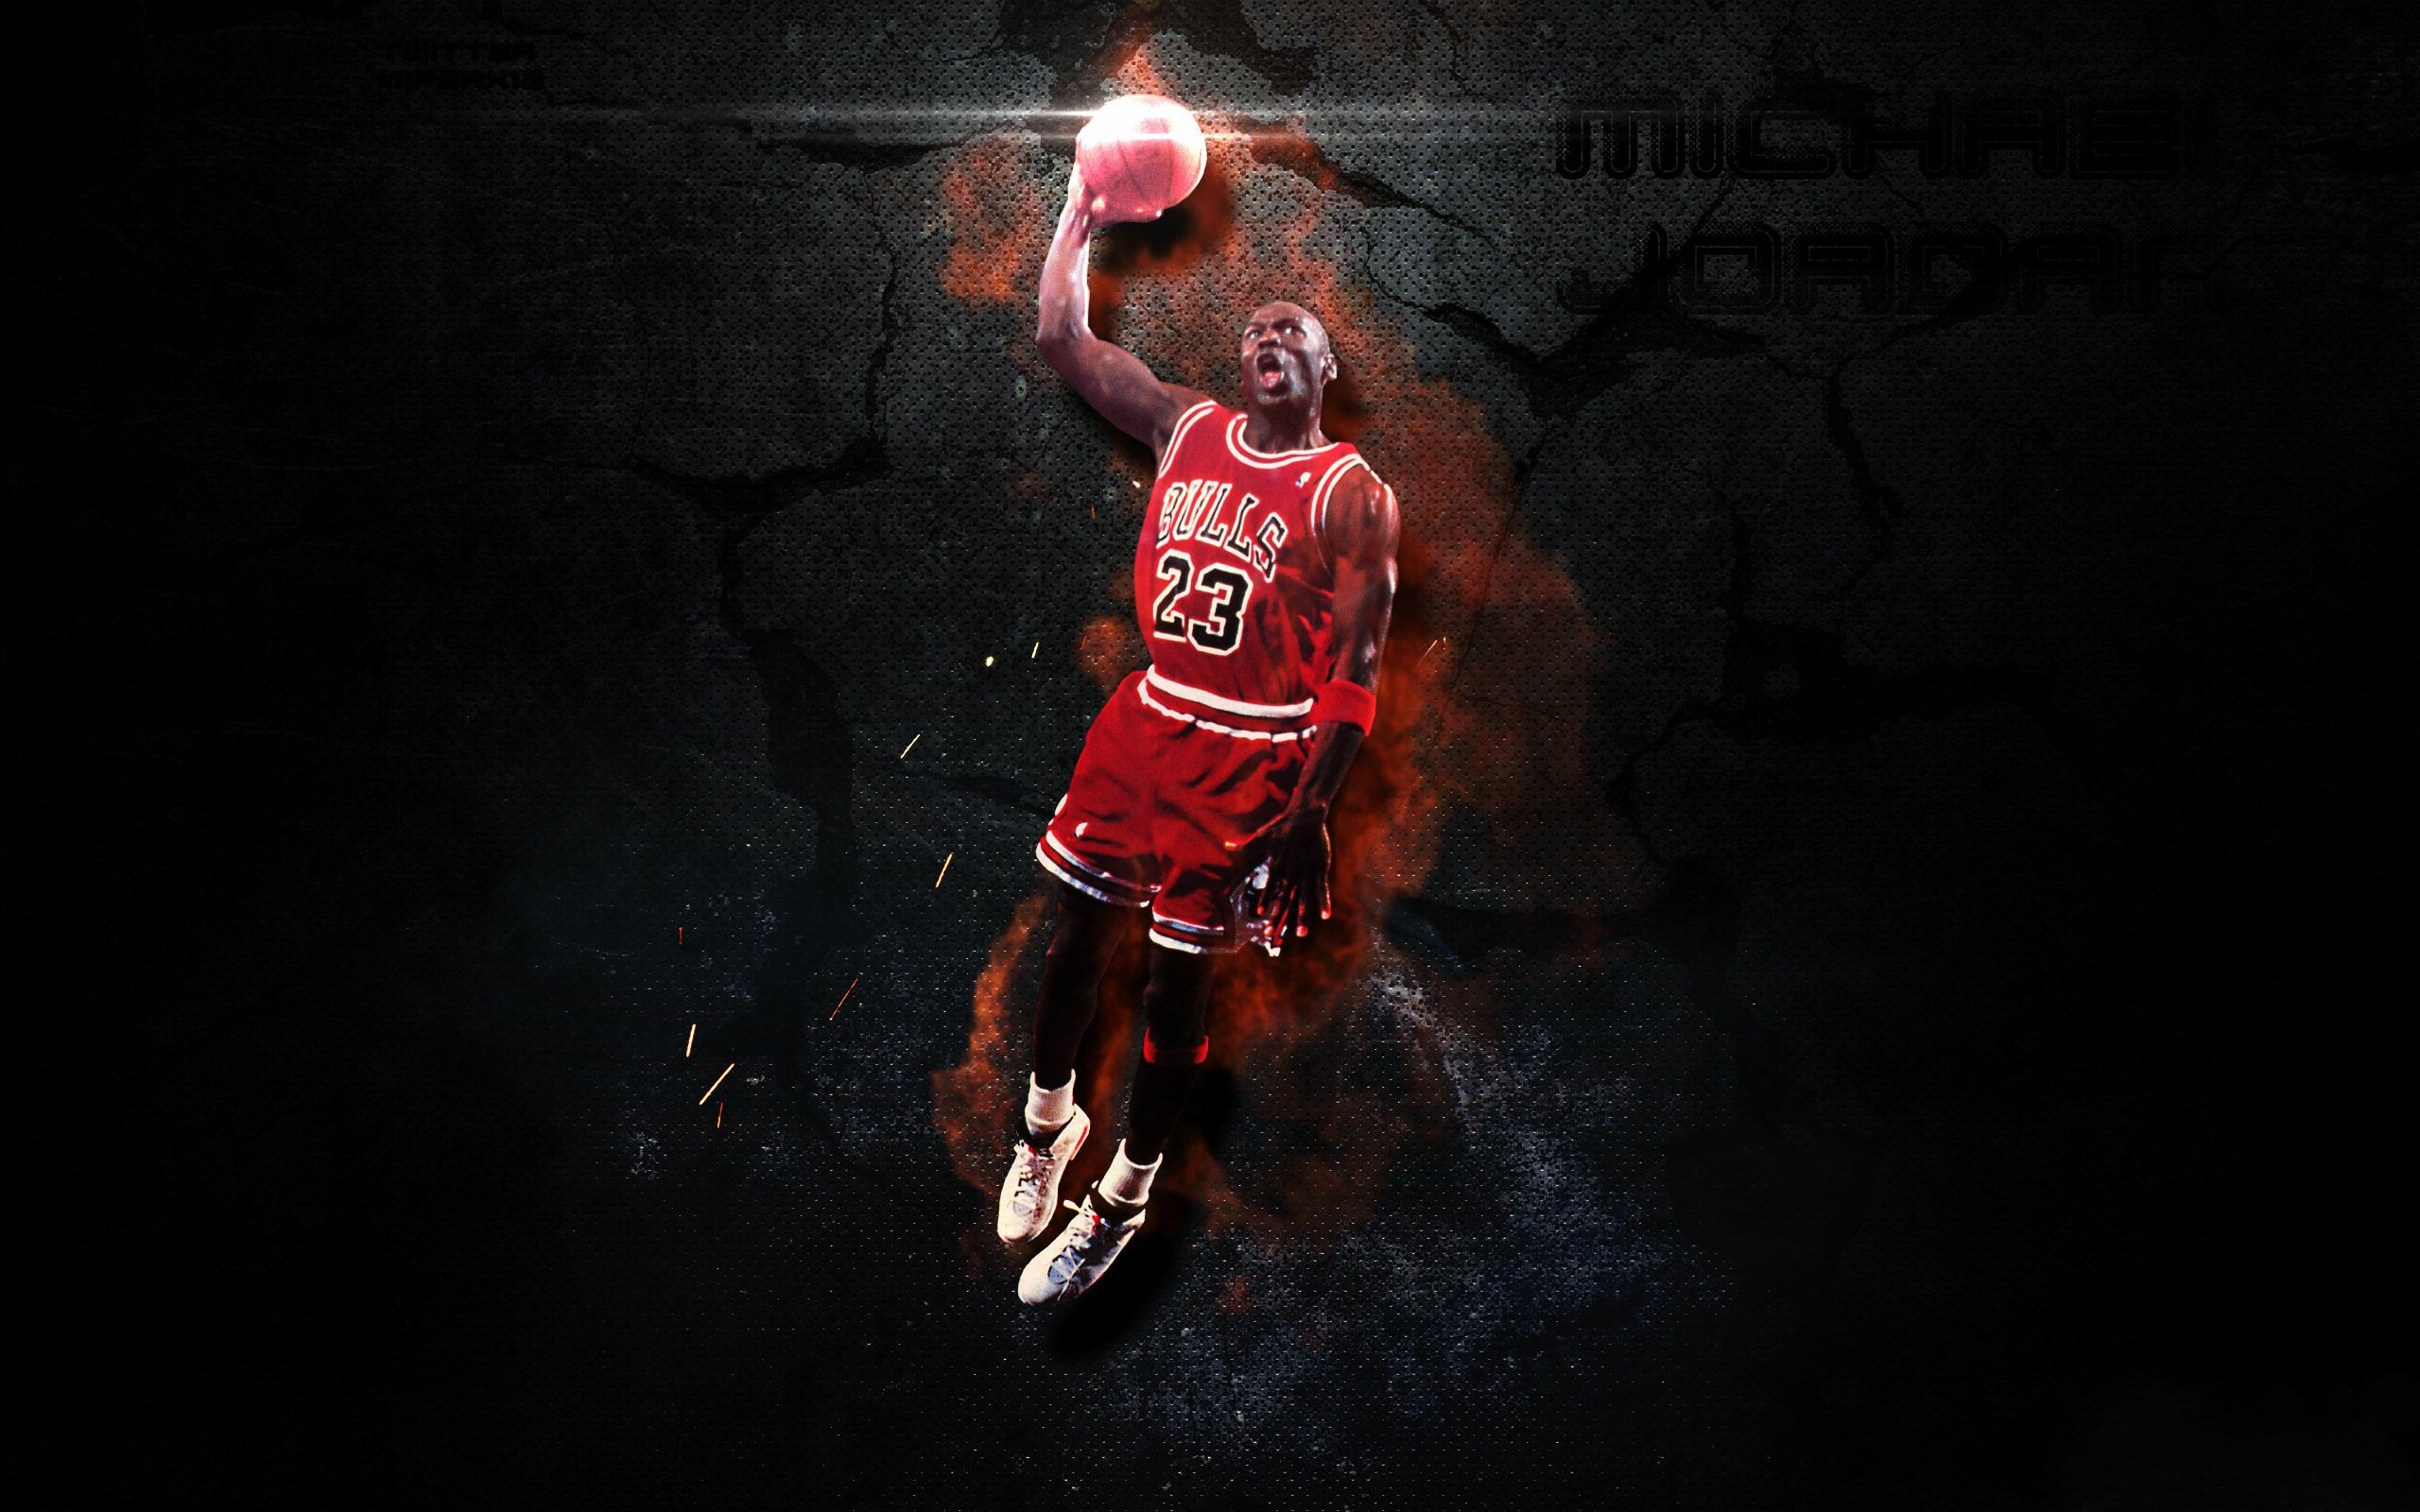 Michael Jordan: Led Bulls to championships in 1996, 1997, and 1998. 2560x1600 HD Background.